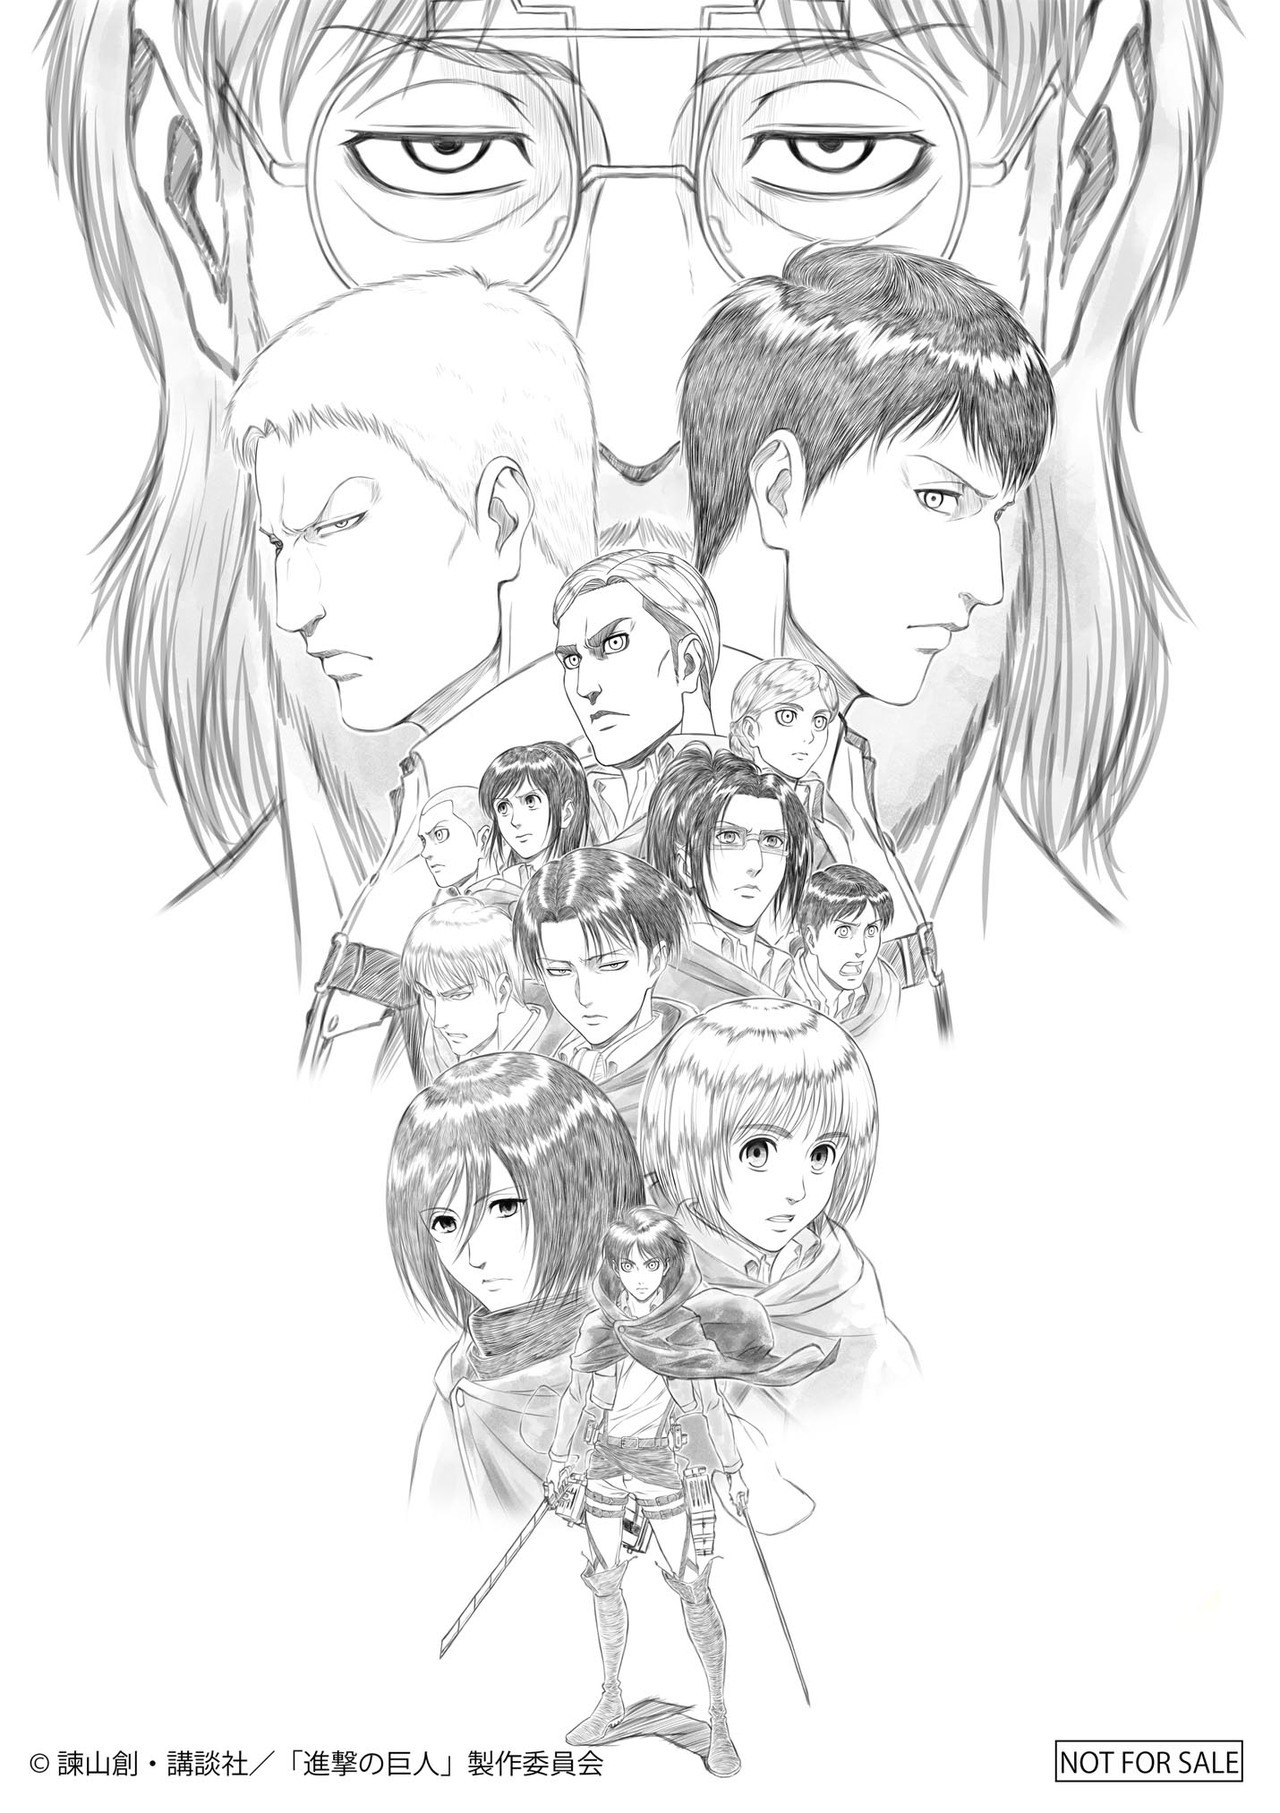 Attack On Titan Staff Celebrates Latest Episode with Special Sketch